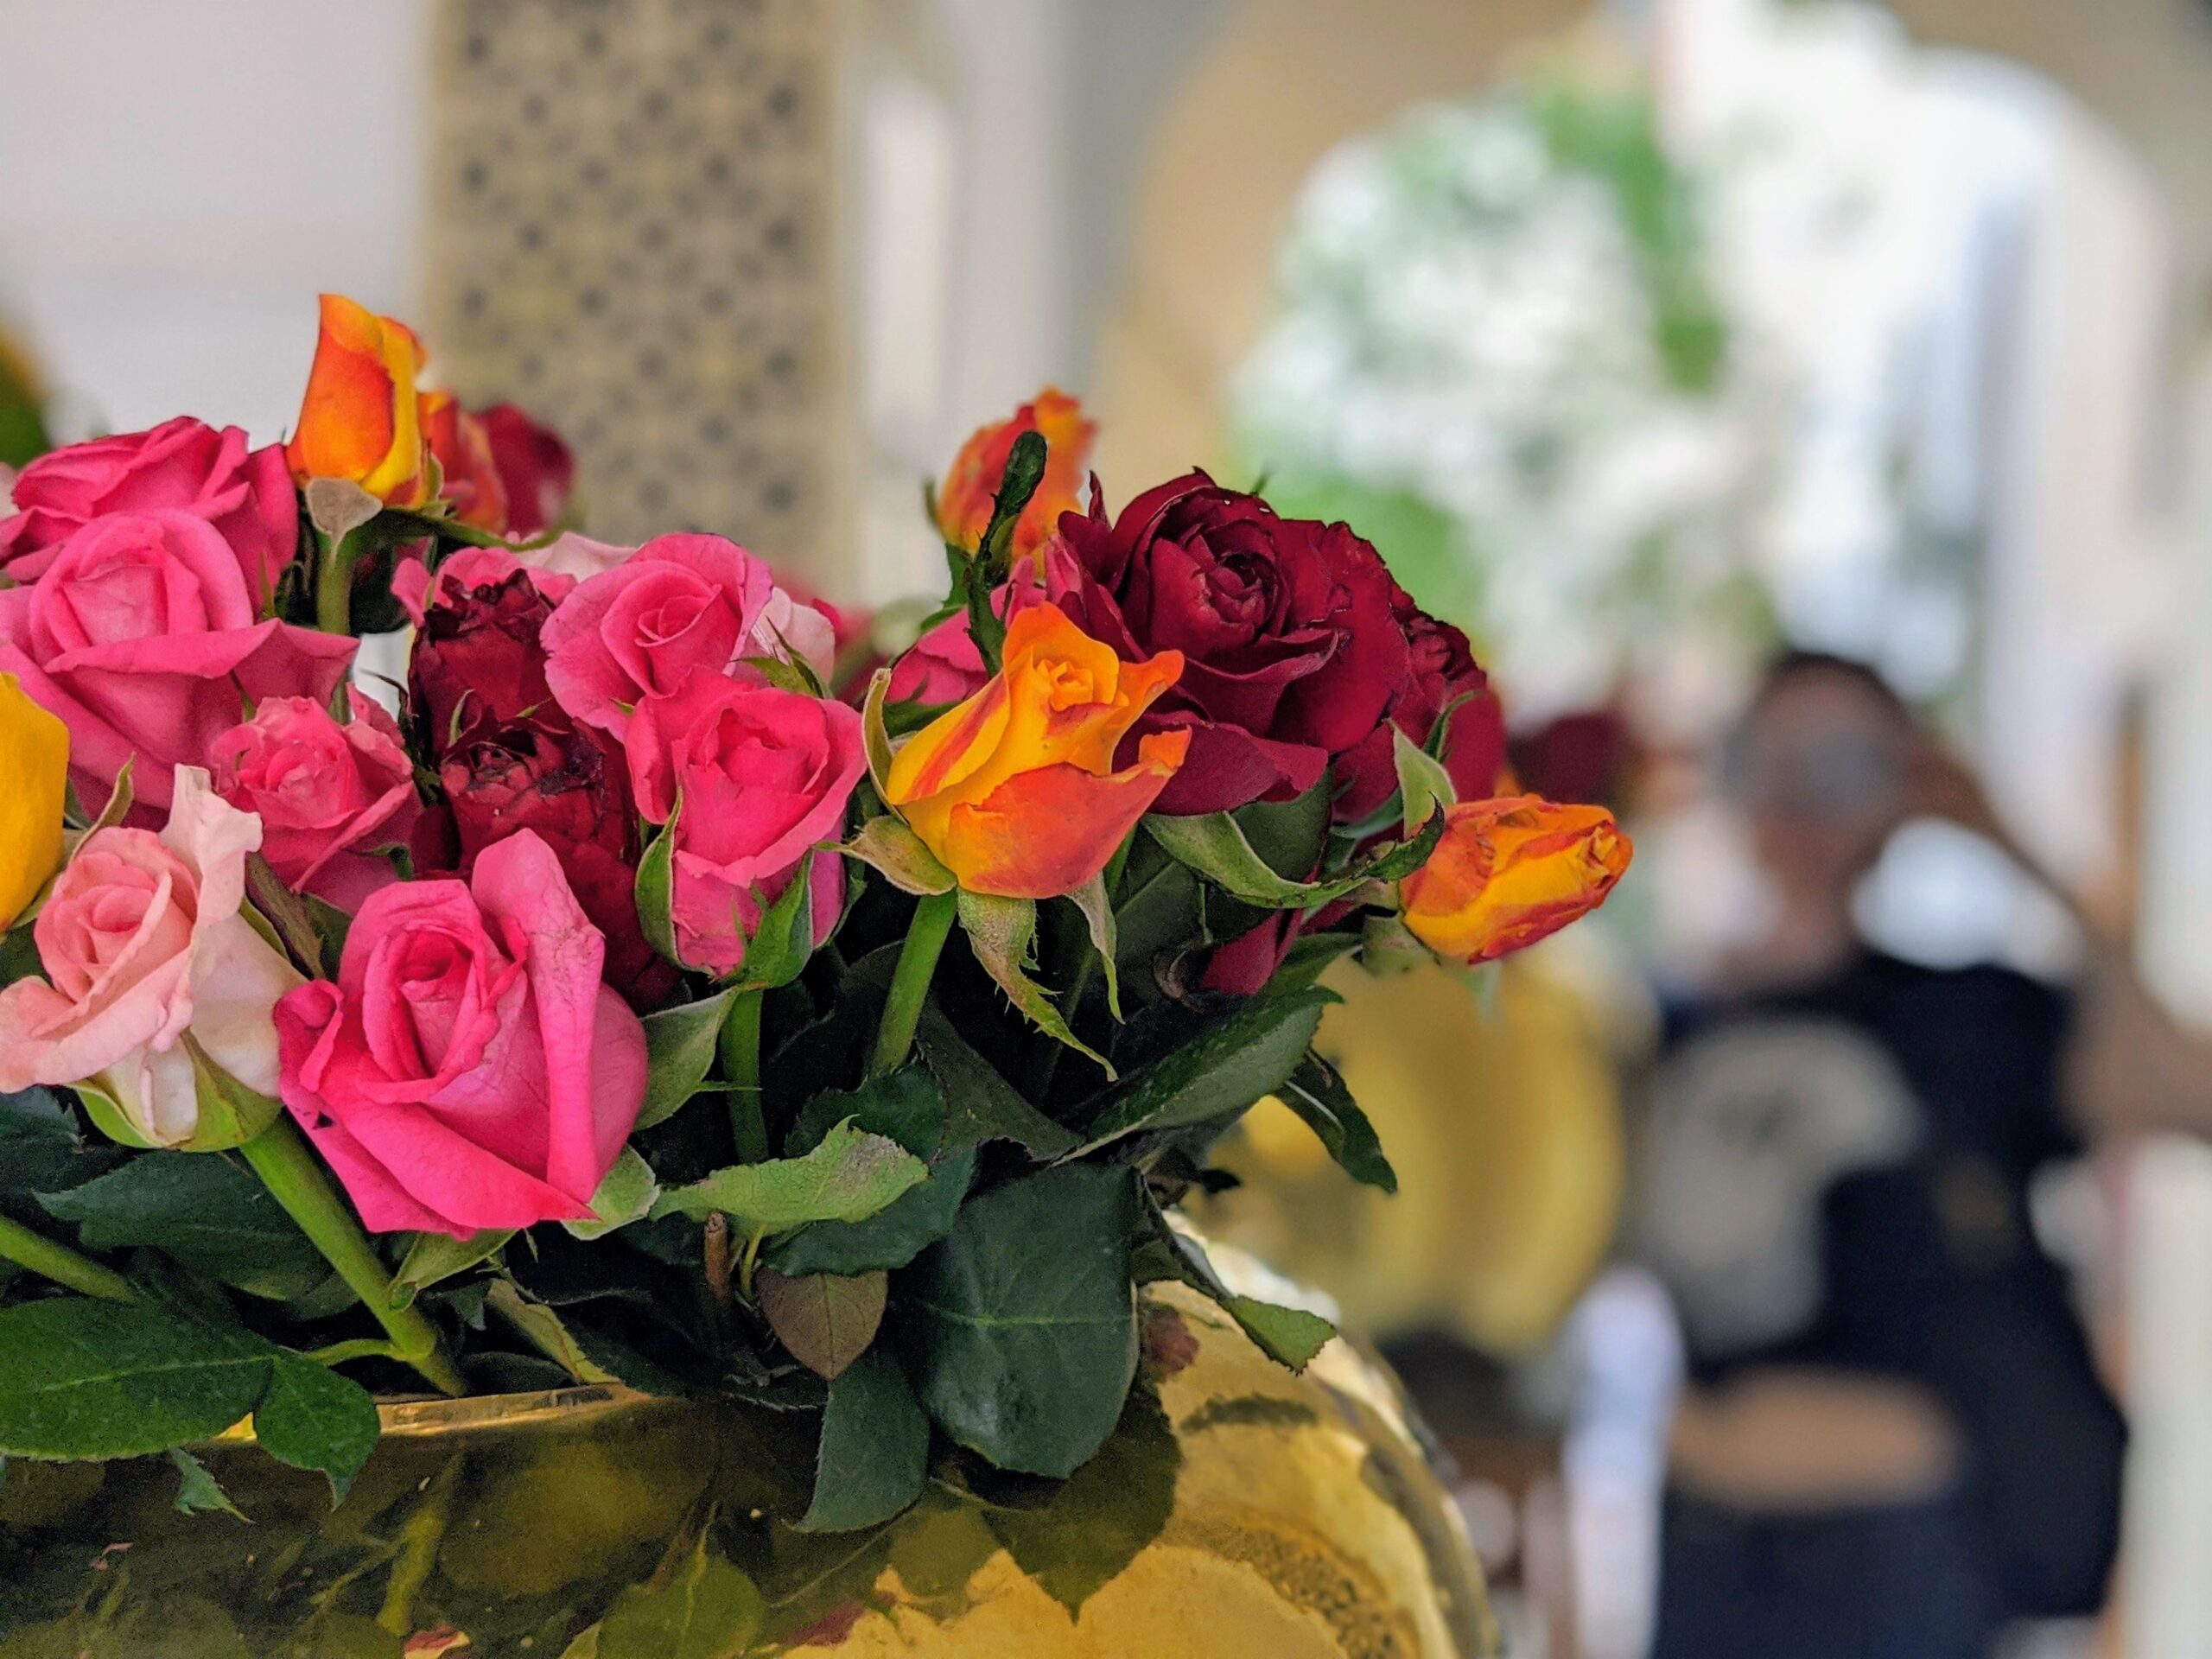 A vase of budding roses in an assortment of colors